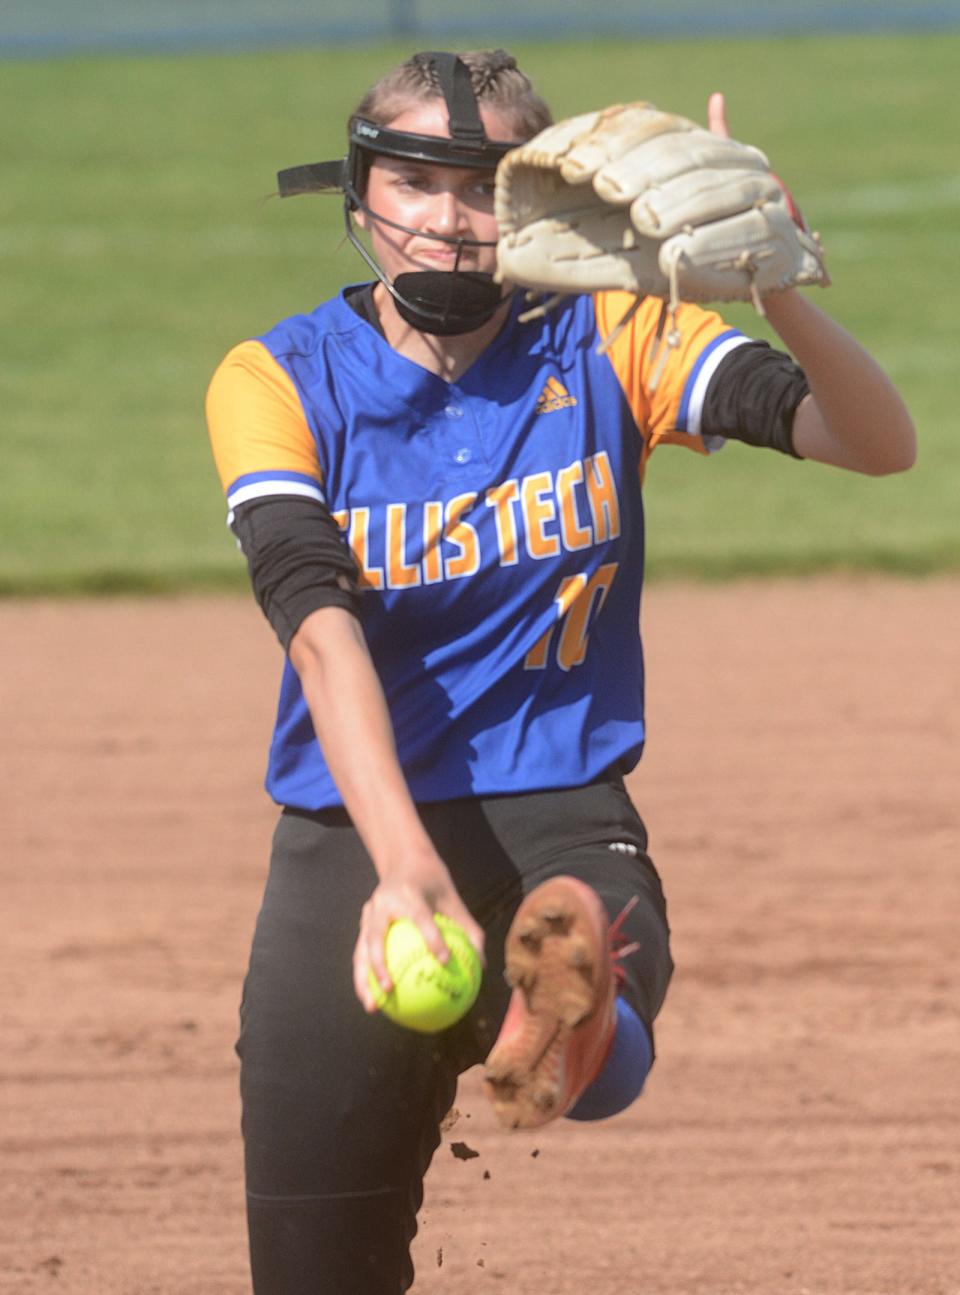 Ellis Tech's Rose Lopez tossed a no-hitter in the Golden Eagles' 14-0 win over Goodwin Tech.